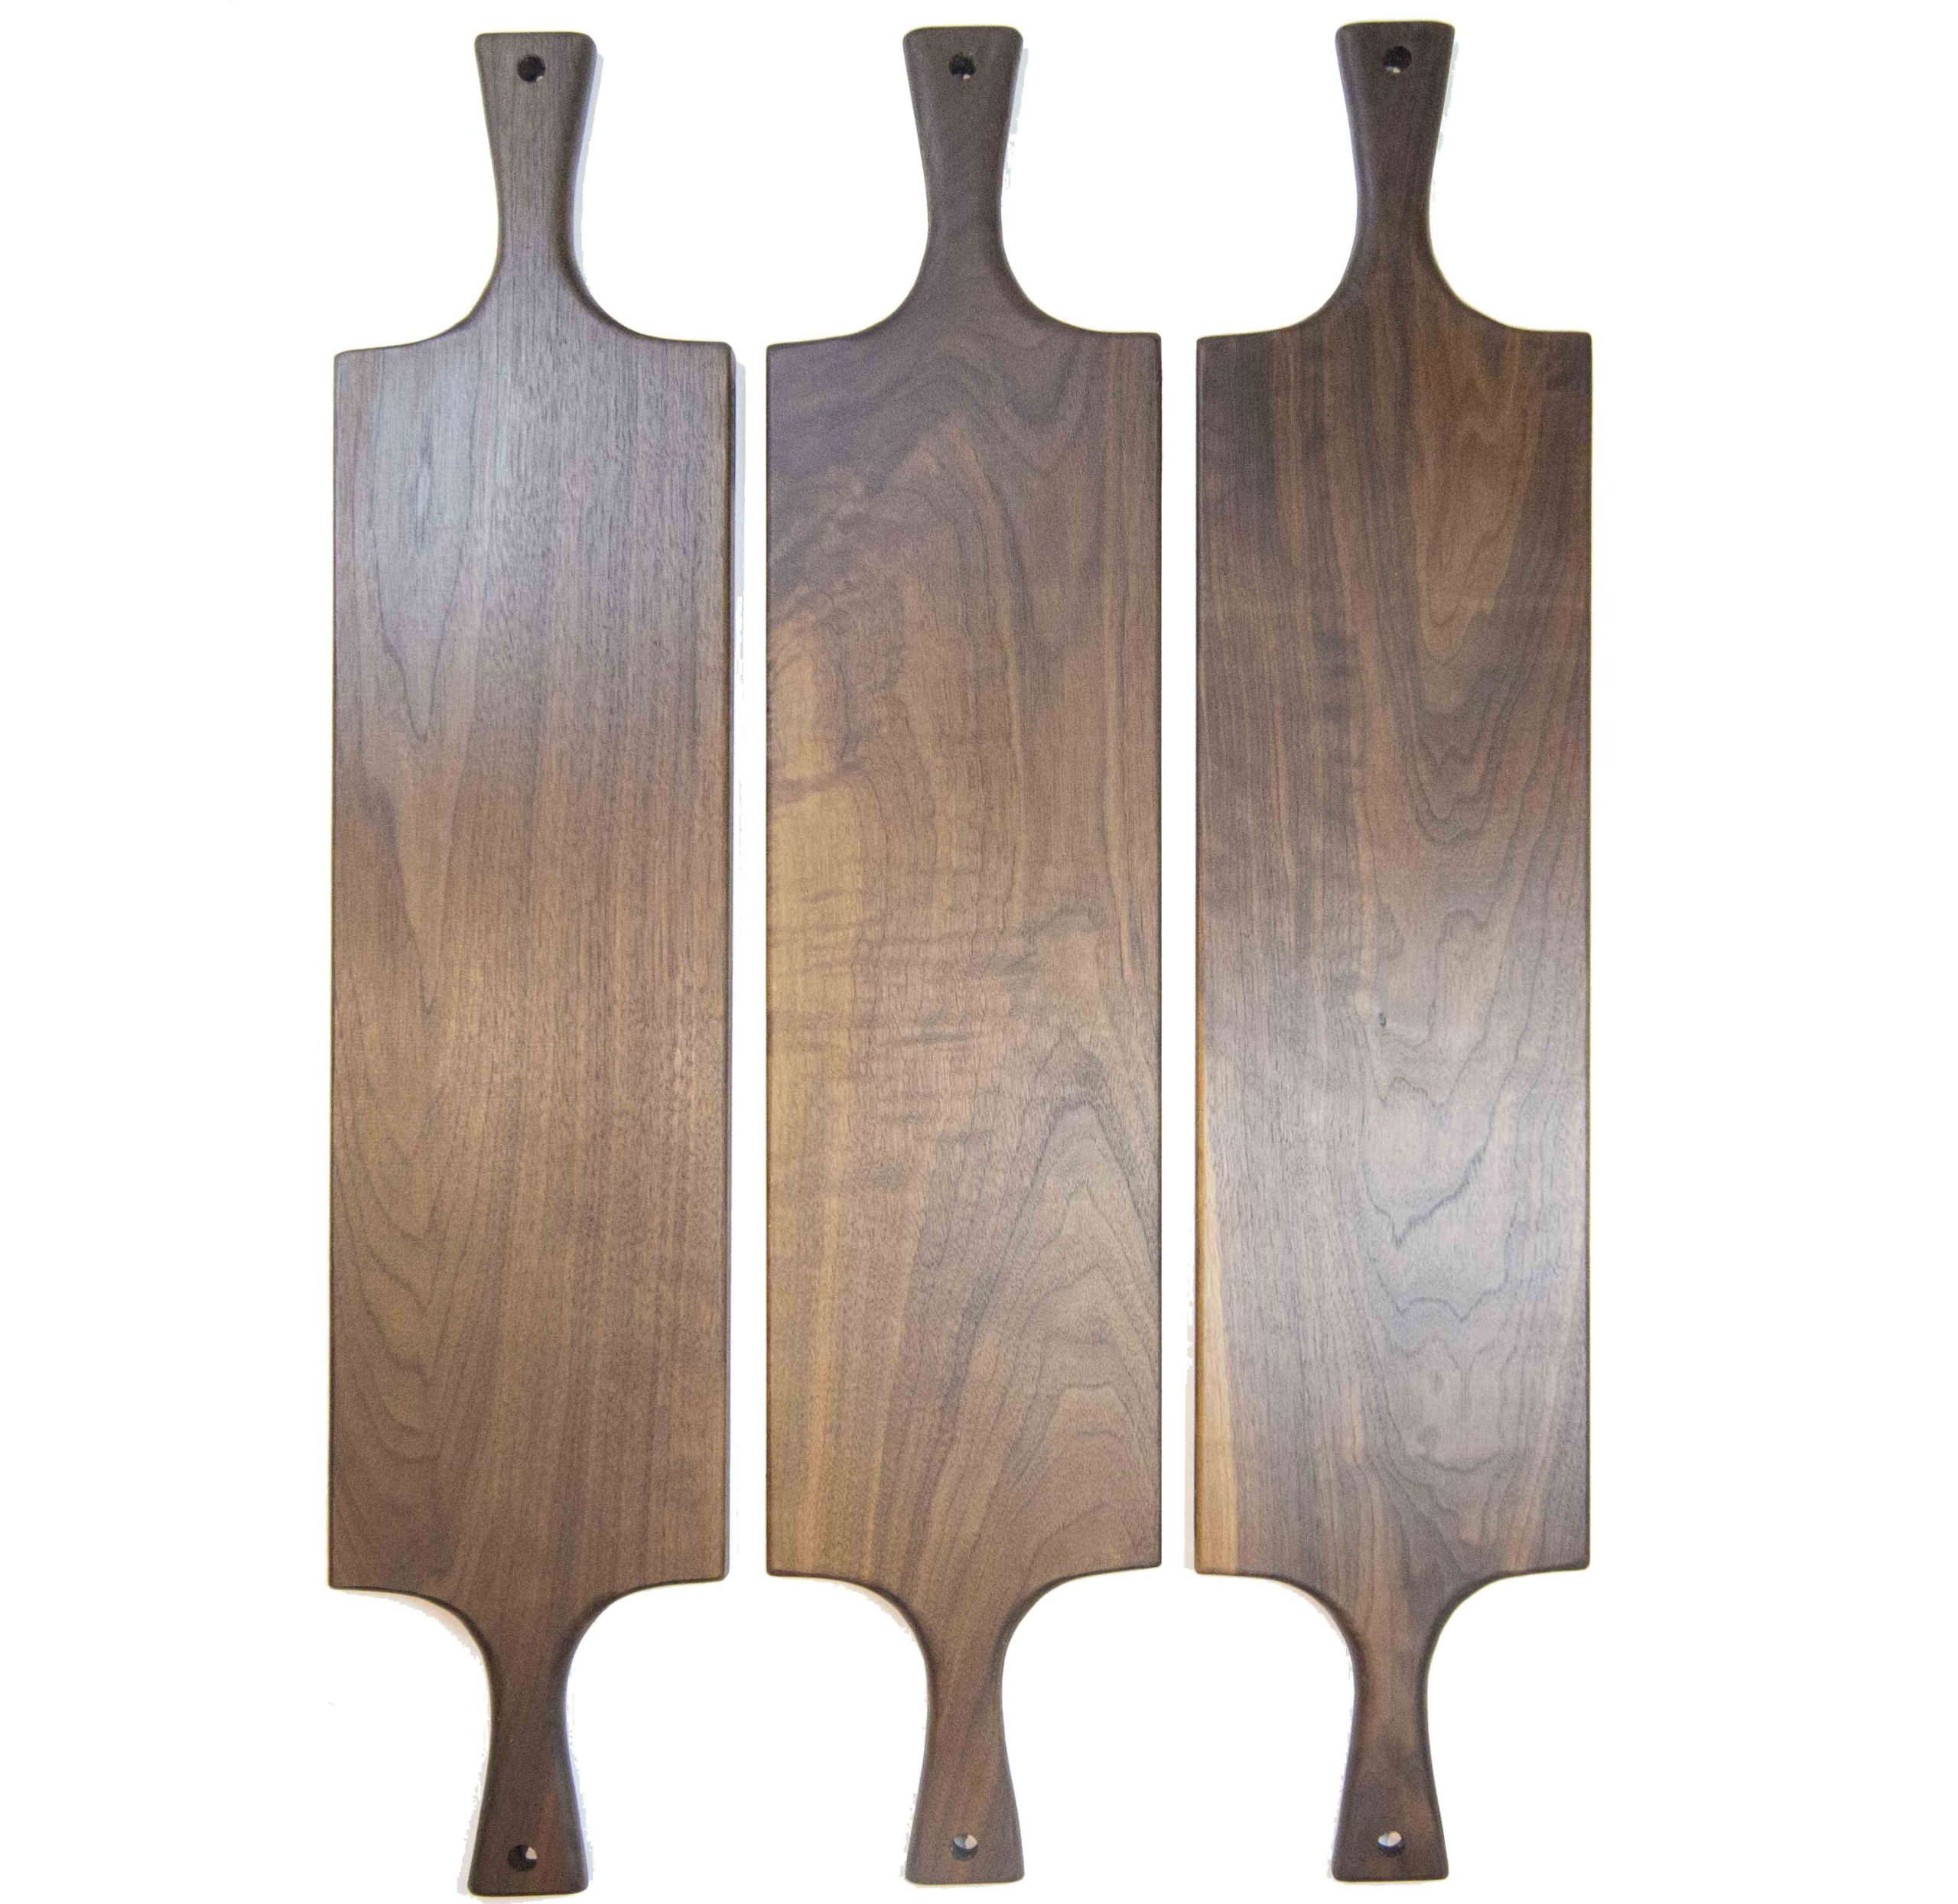 mise oak Charcuterie board 13” tall x 8 1/4 wide x 1” thick